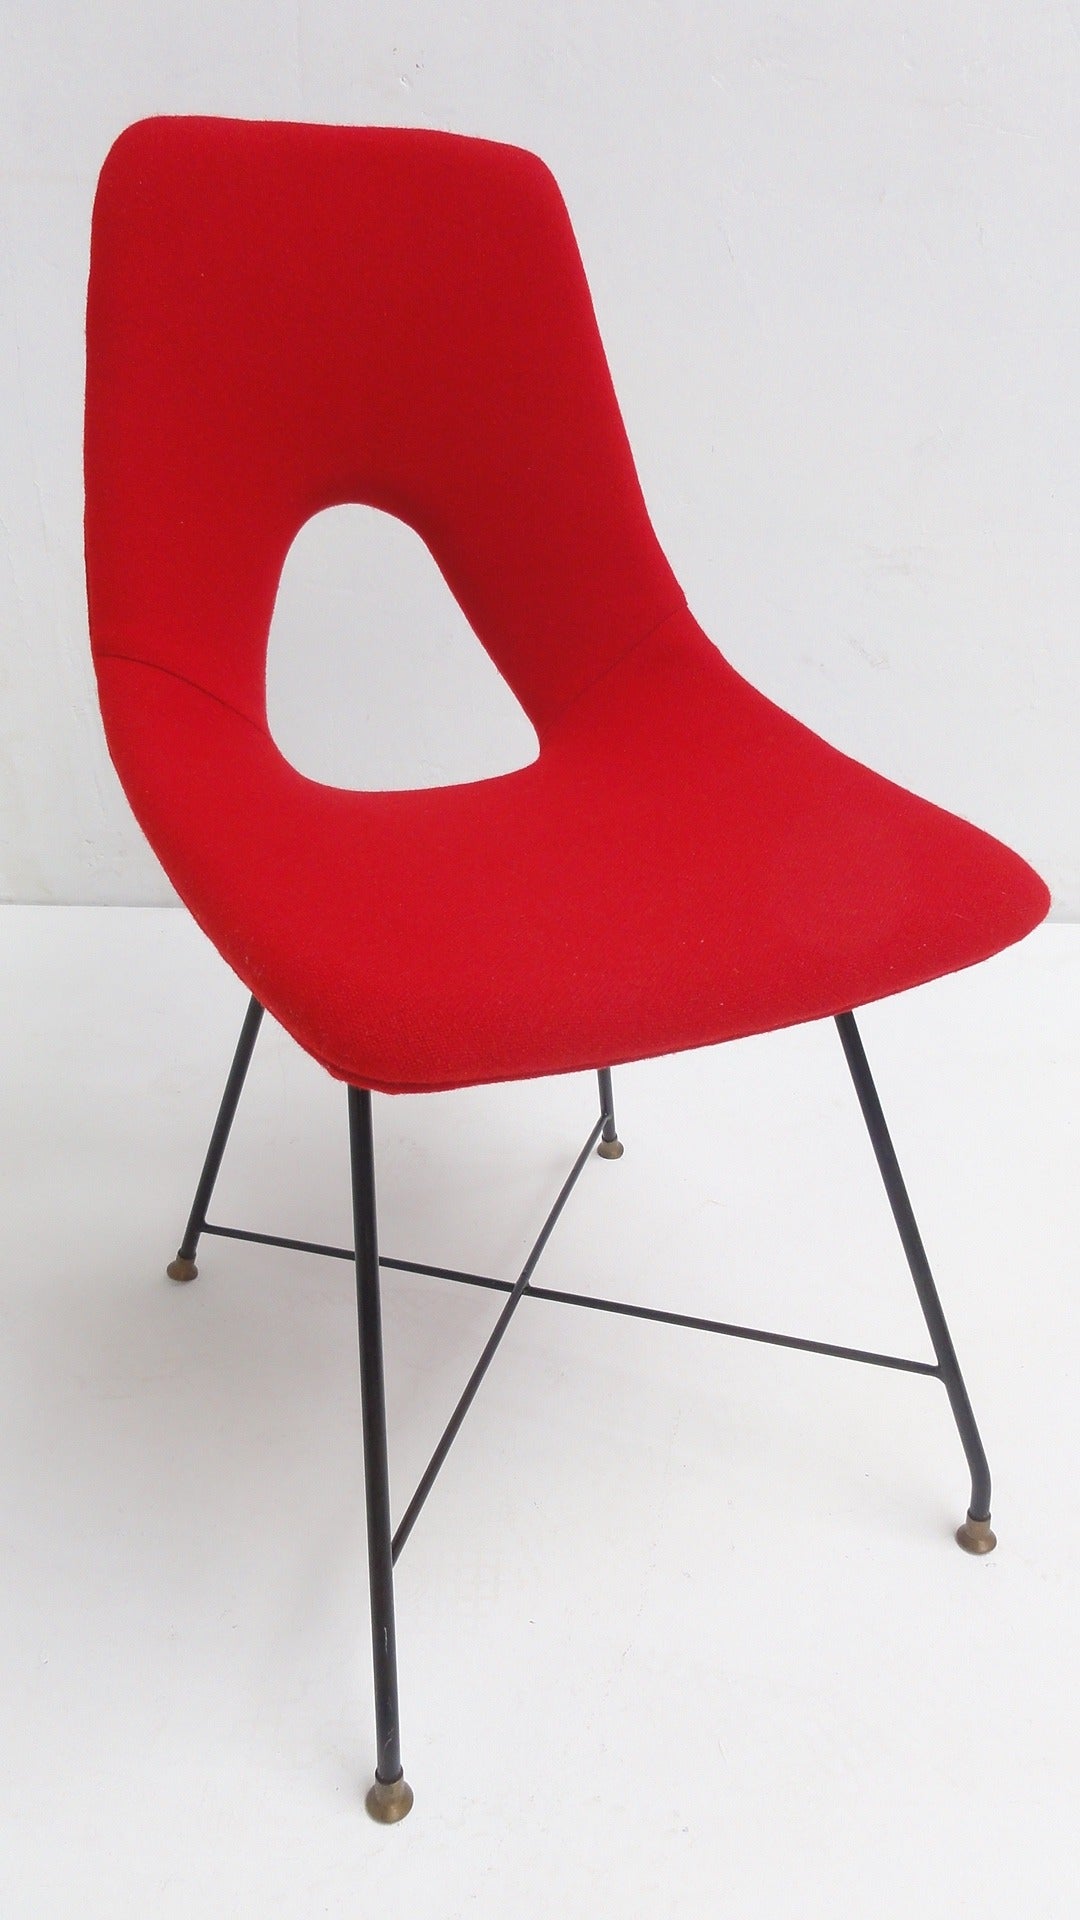 This single side chair by Augusto Bozzi for Fratelli Saporiti is newly upholstered in a red wool Kvadrat fabric.

Metal base has been polished and left in its original vintage condition to authenticate the vintage character of this eye-catching